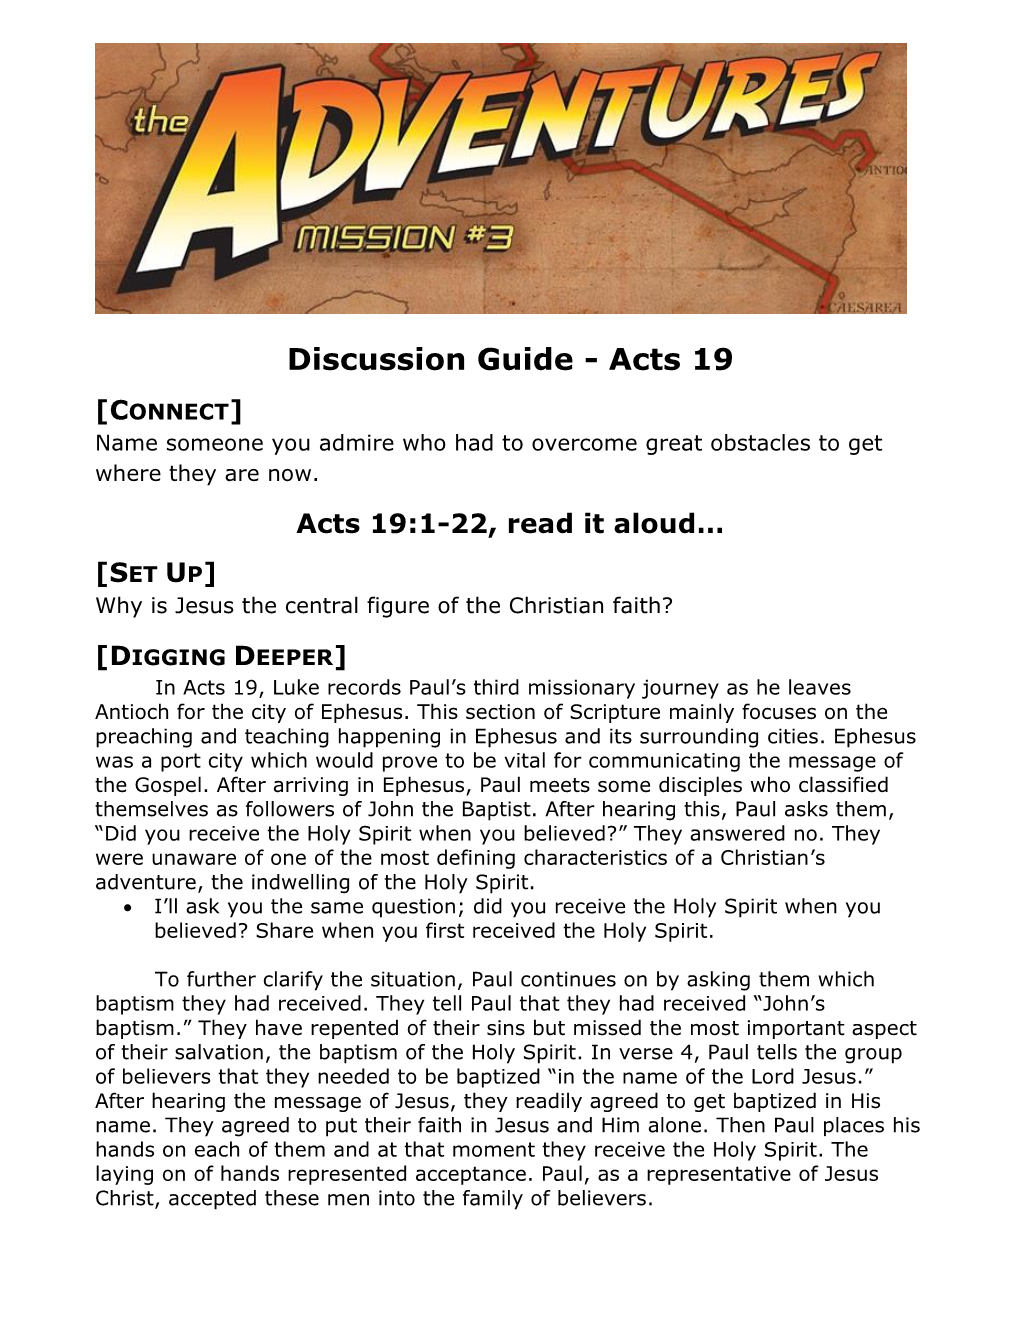 Discussion Guide - Acts 19